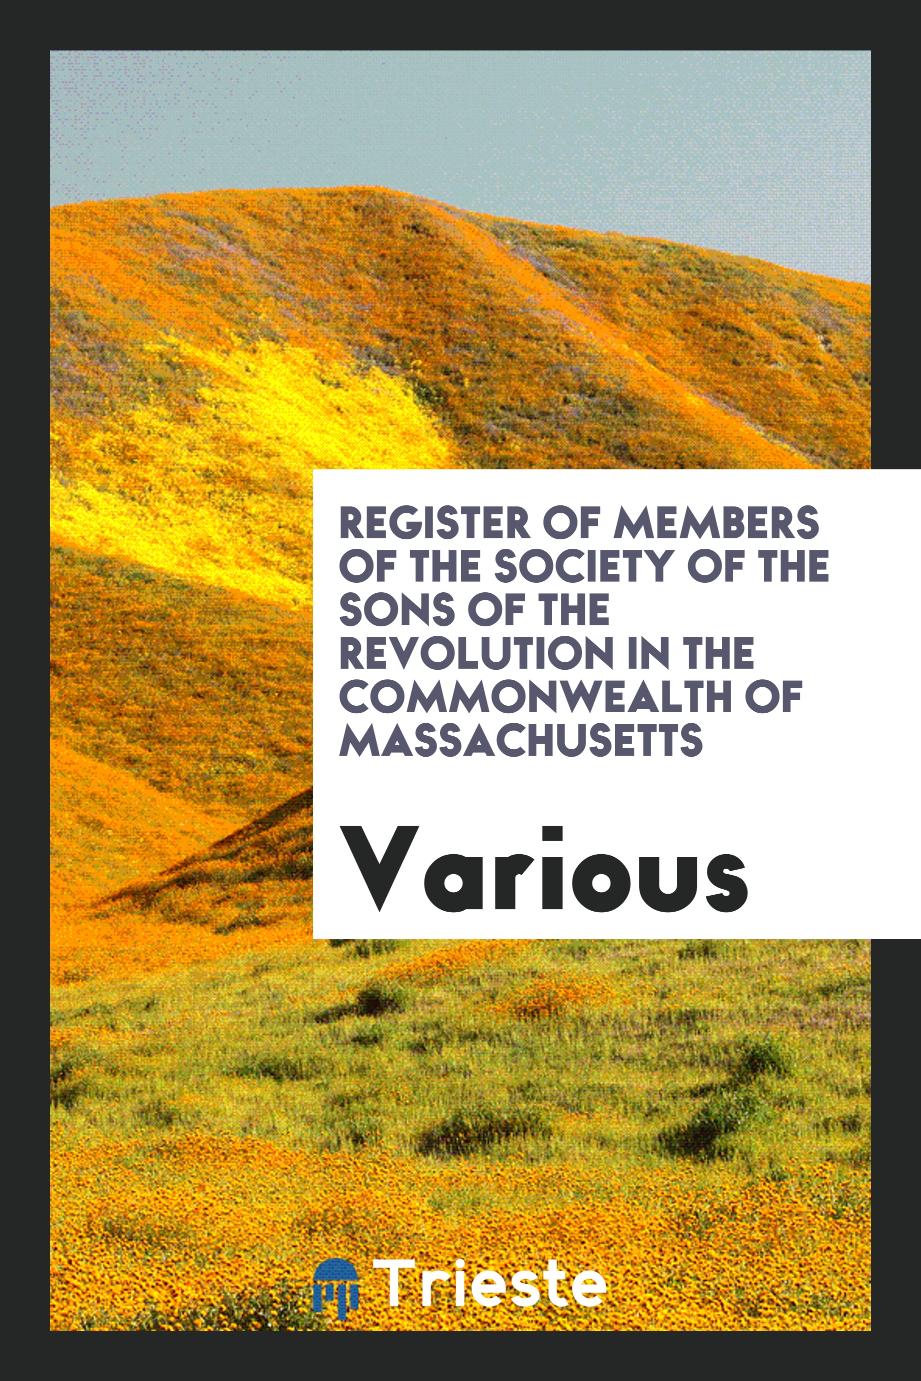 Register of Members of the Society of the Sons of the Revolution in the Commonwealth of Massachusetts